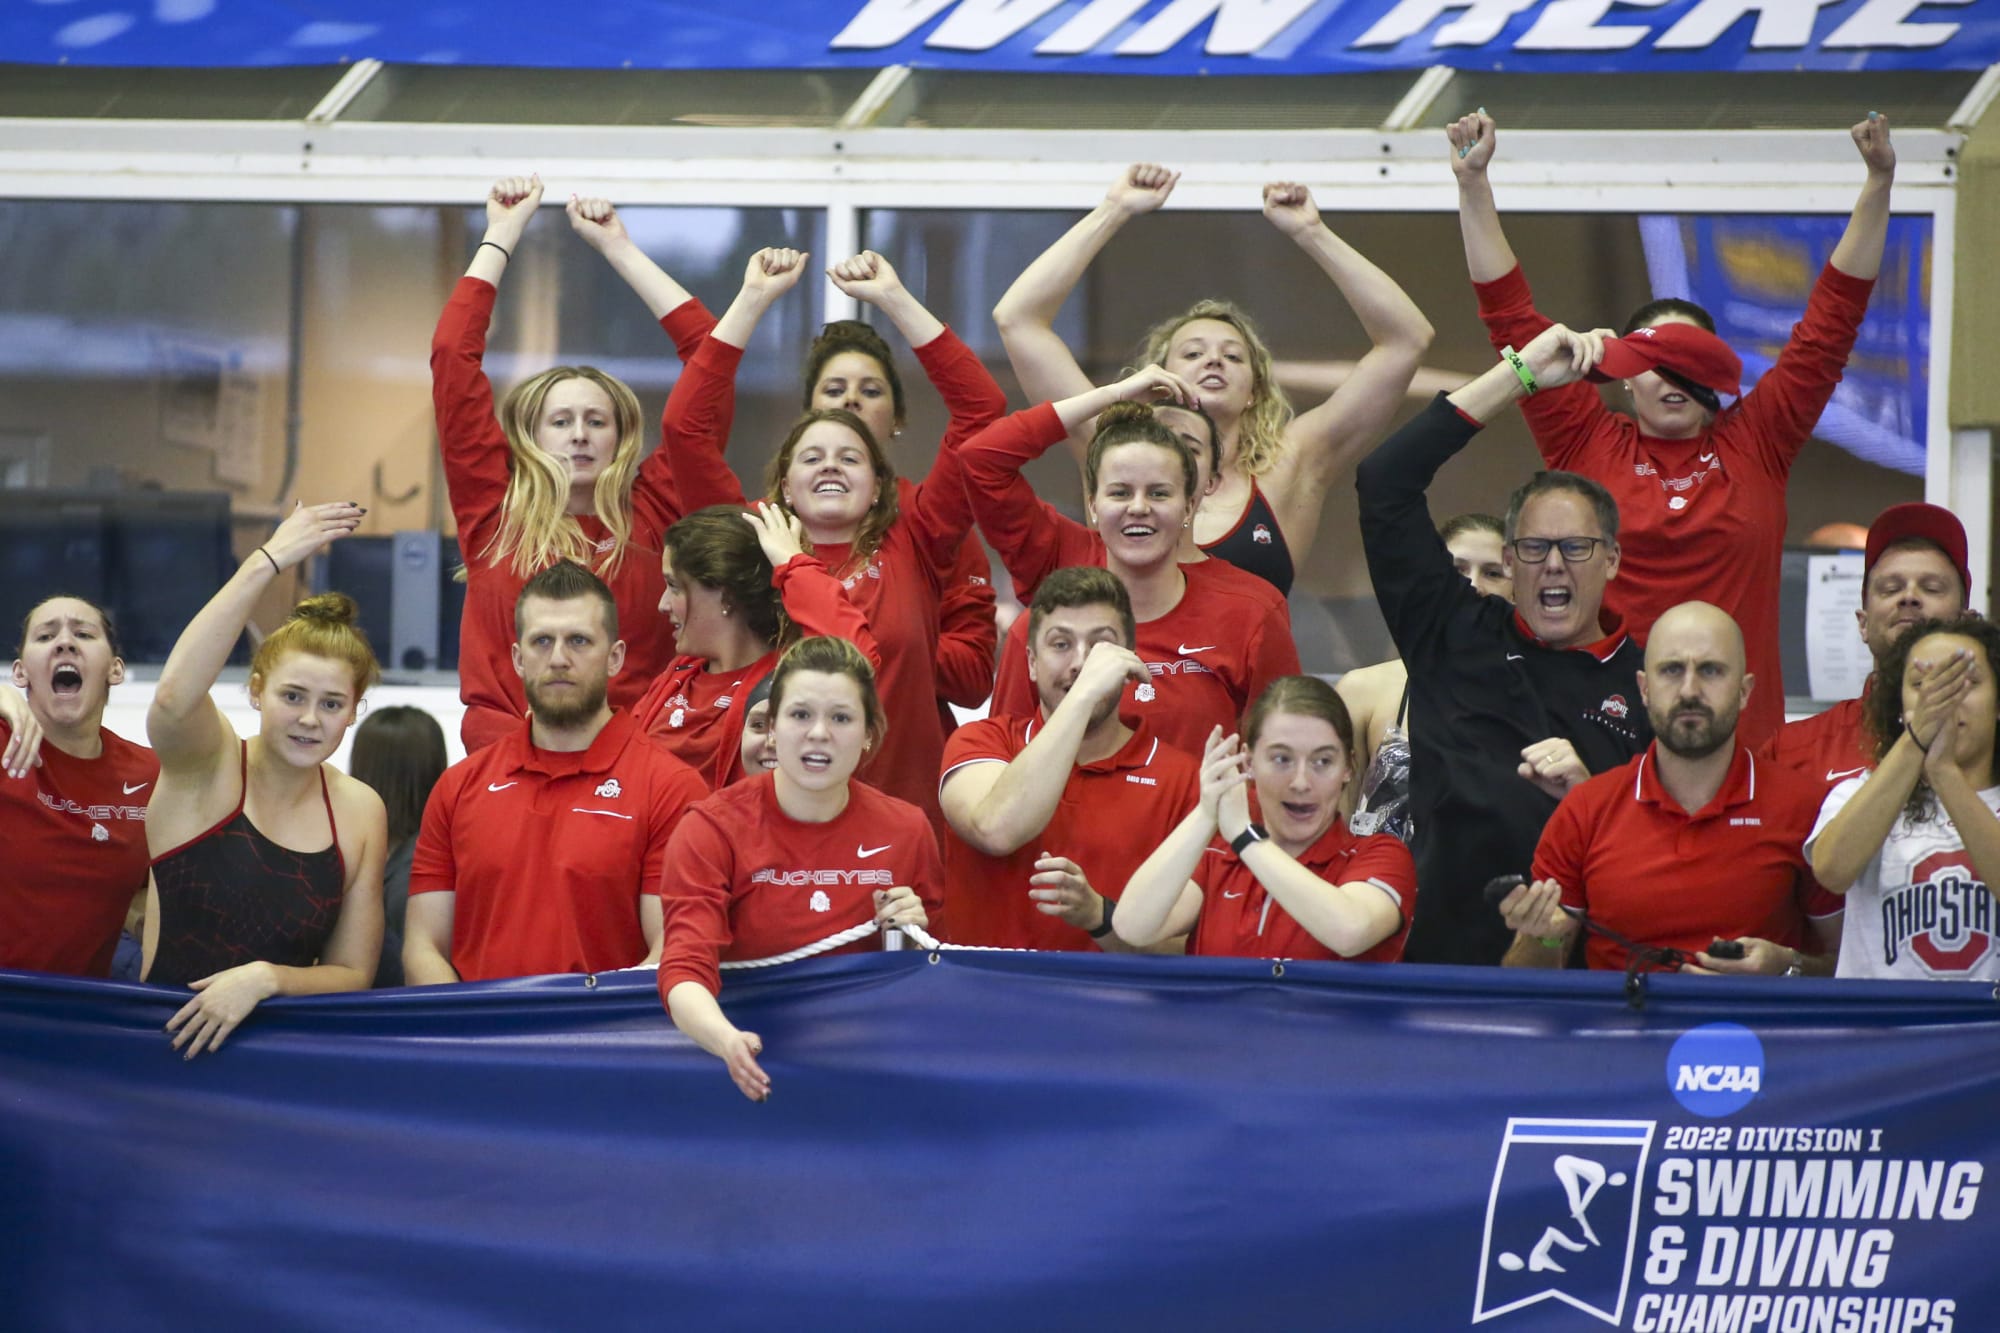 Ohio State synchronized swimming is most dominant team ever